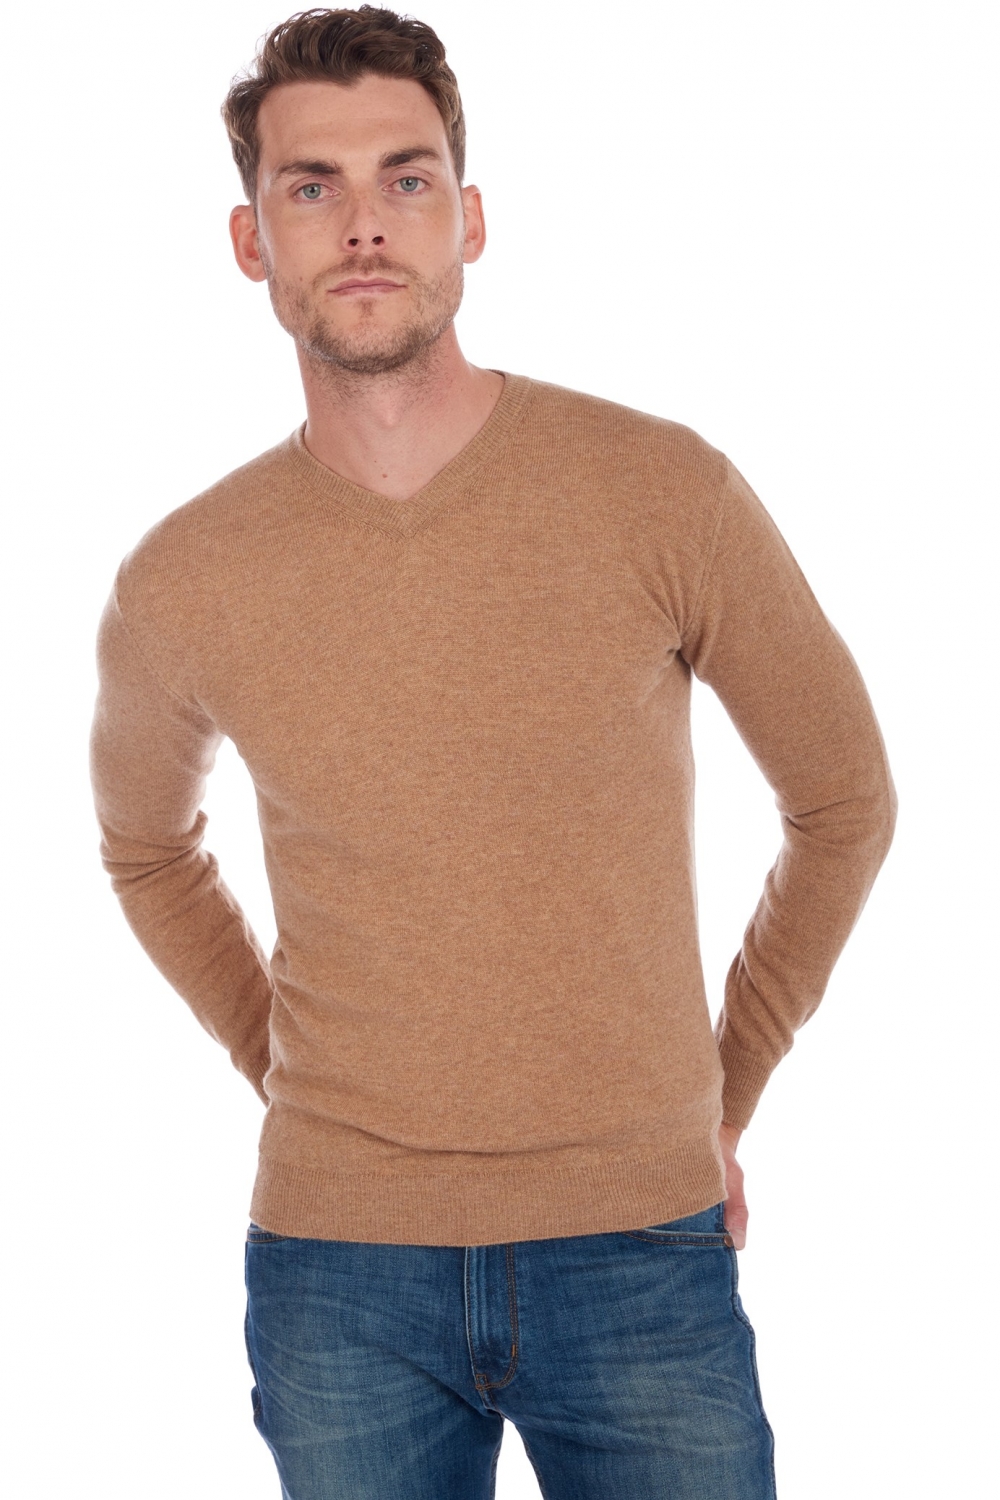 Cachemire pull homme maddox camel chine 2xl